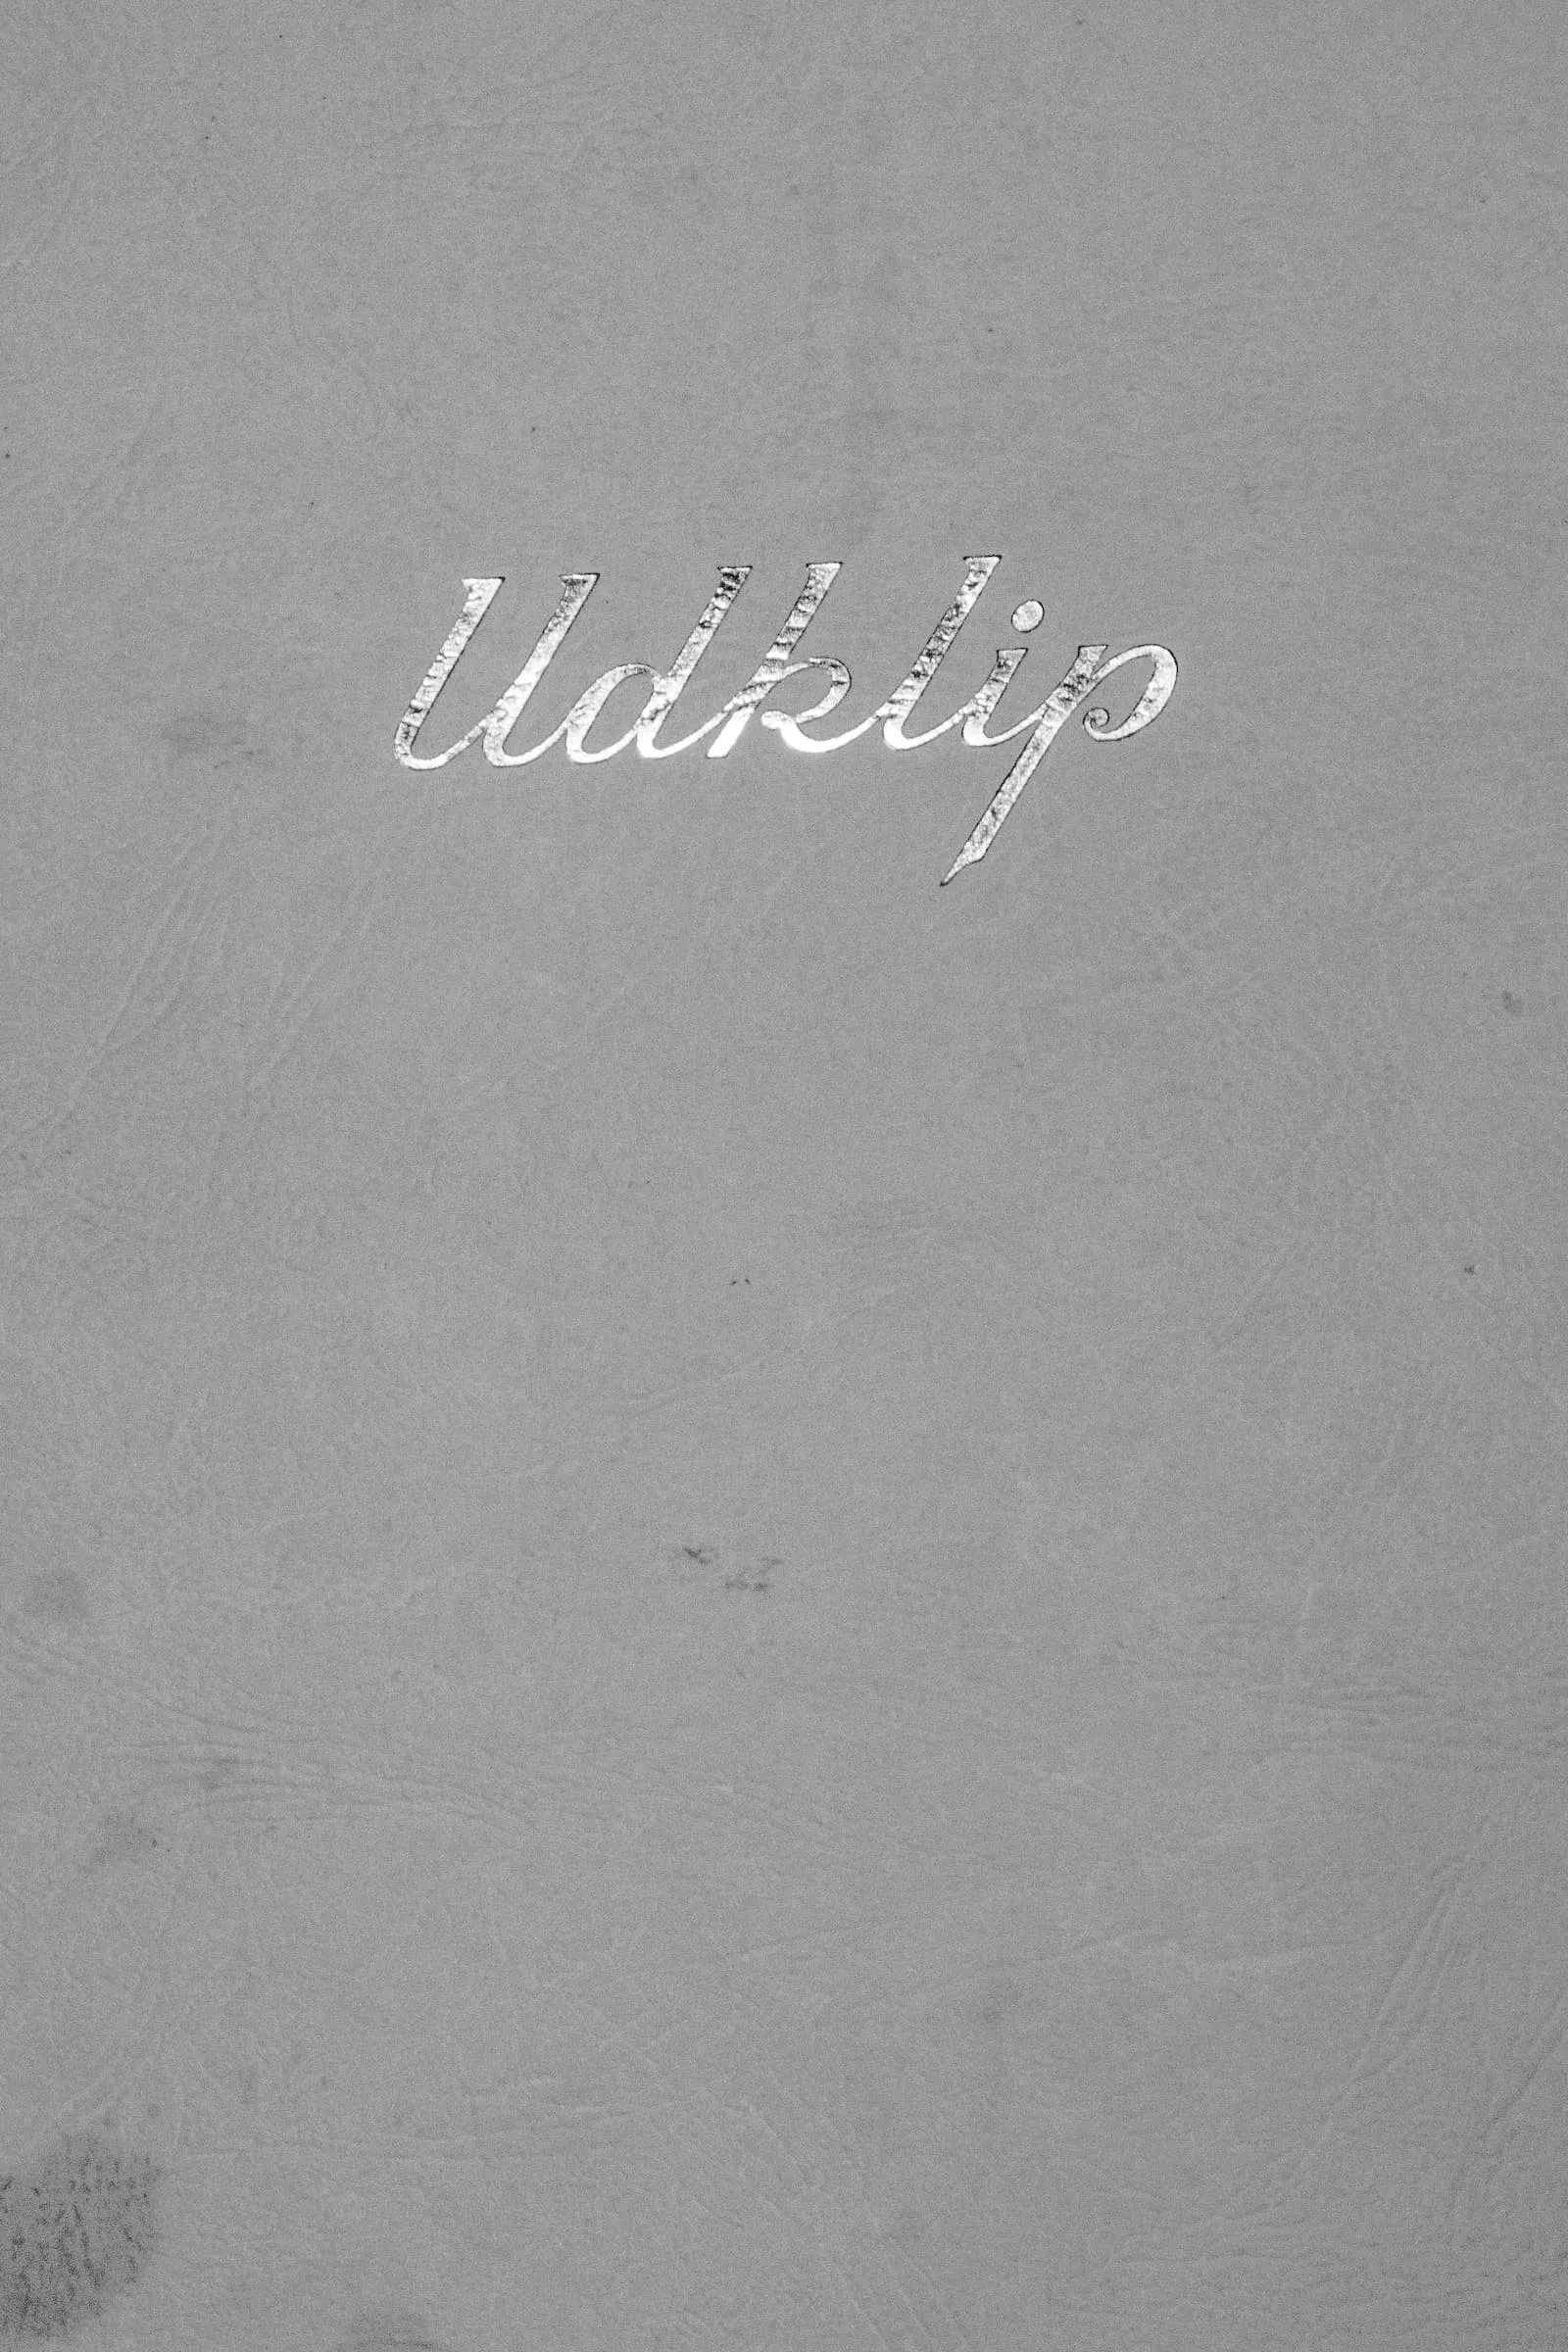 A photo of a very old notebook cover, decades old, that says 'Udklipp', which means 'clippings', in Danish.